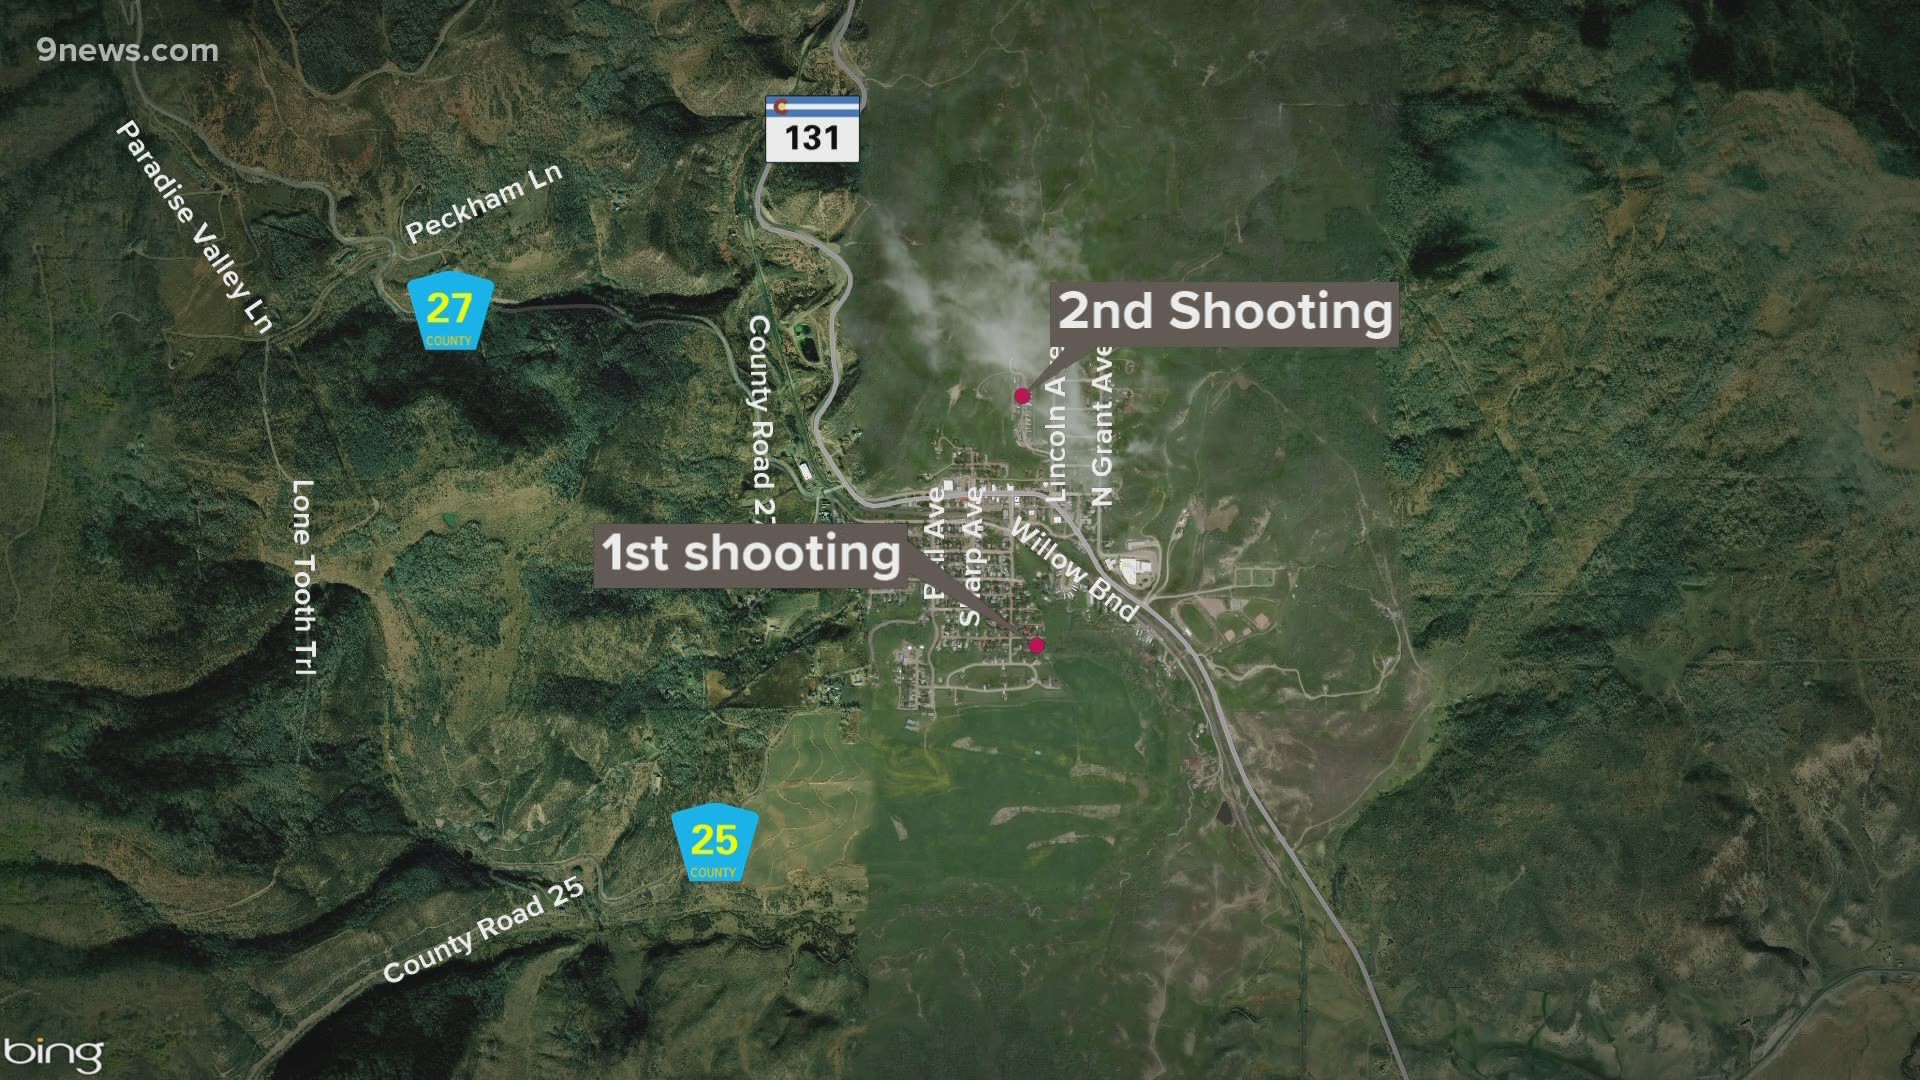 Steven Patrick Padilla Jr. fatally shot one person and wounded two others before he was shot and killed,  the Routt County Sheriff's Office said.